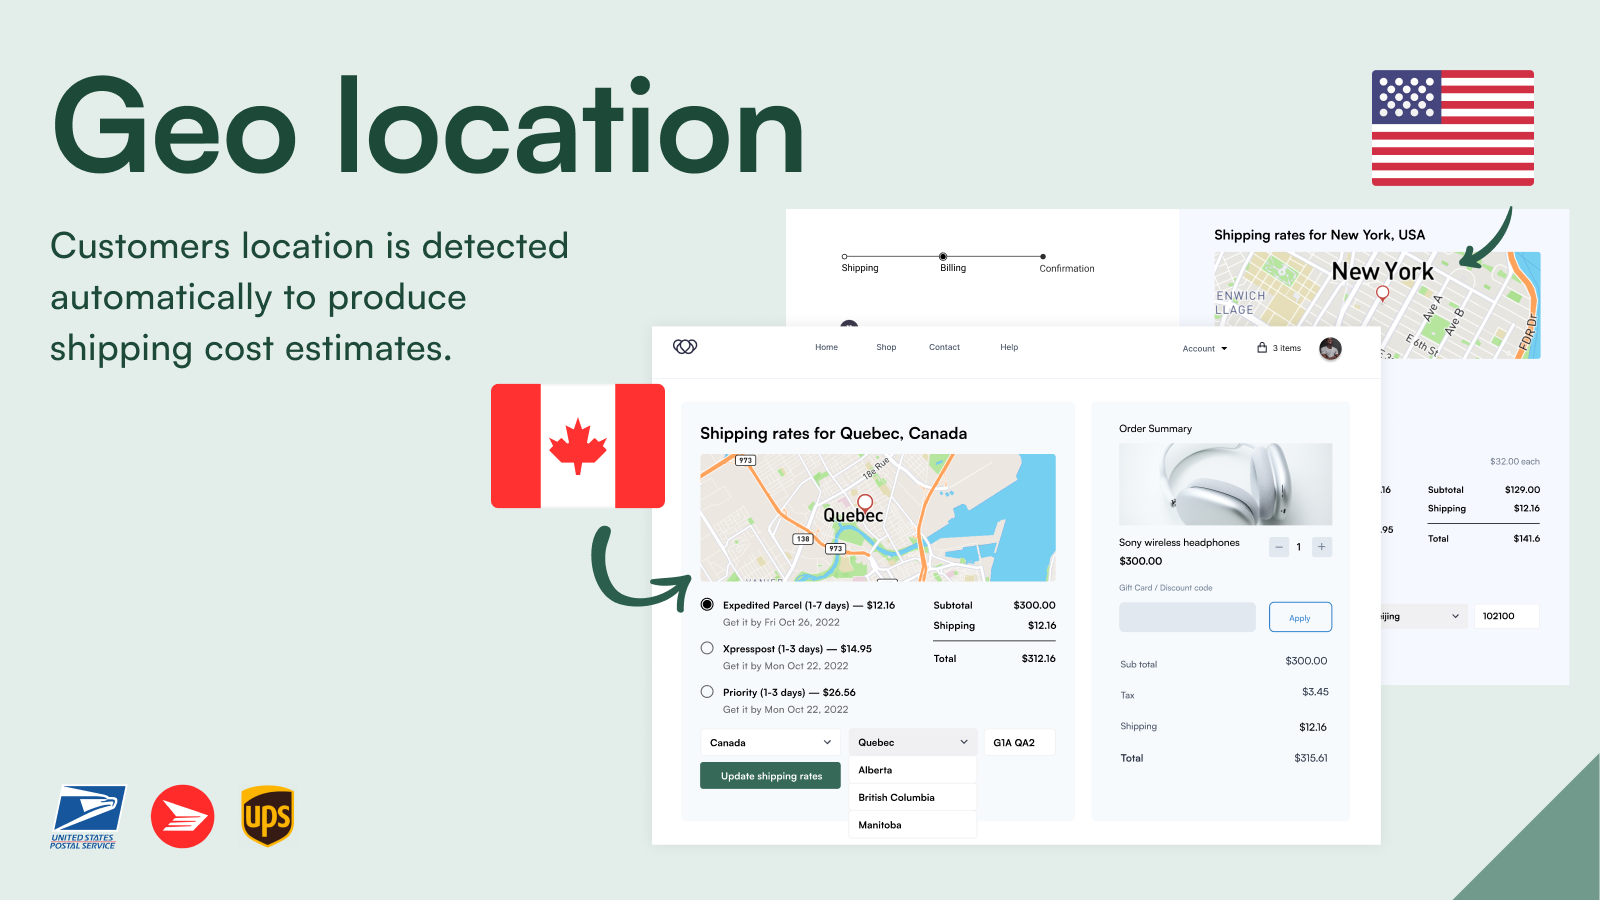 Automatic geolocation detection acc to customers' location.